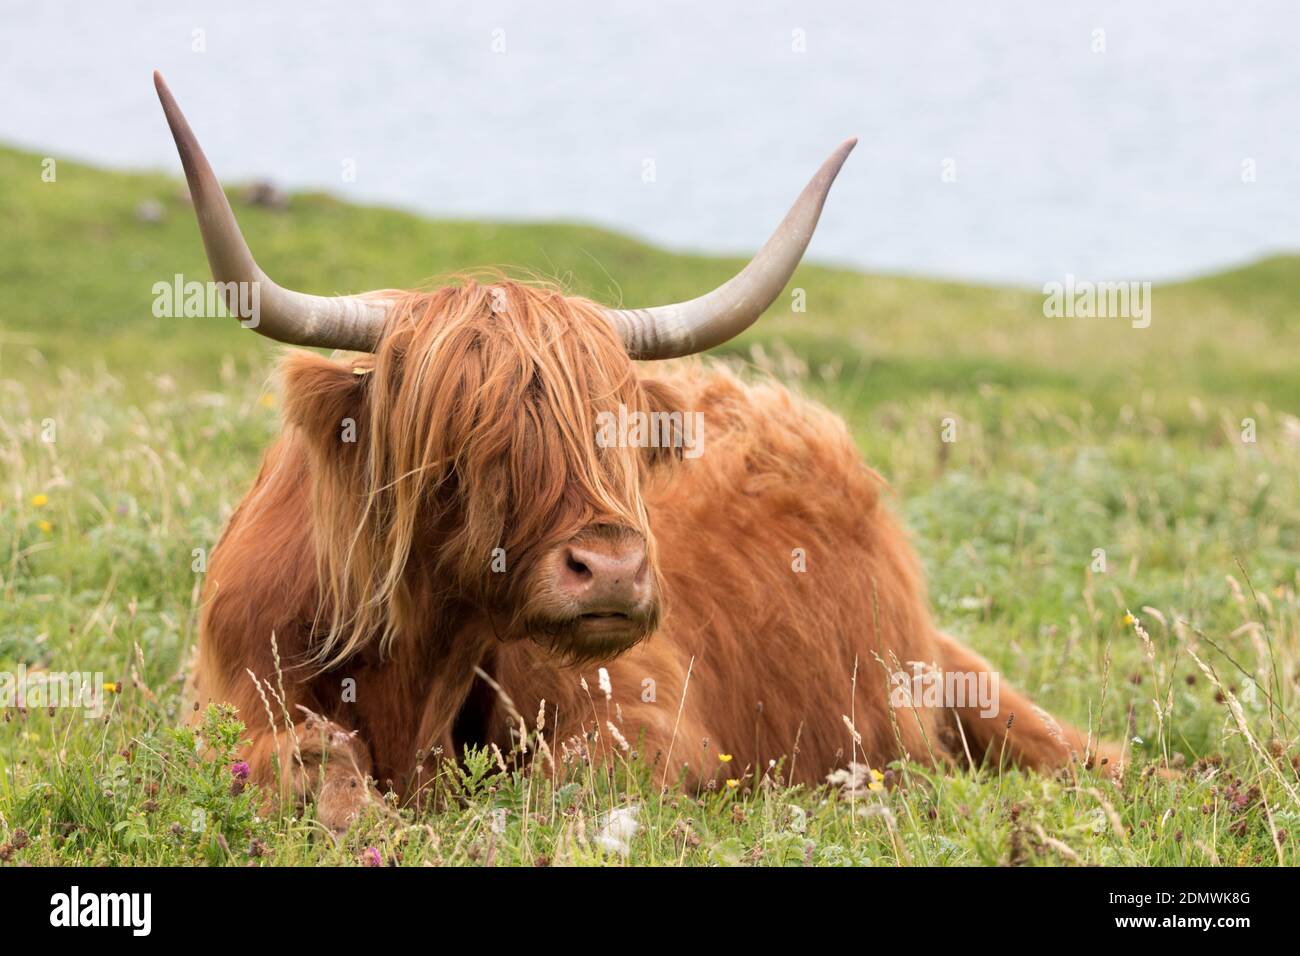 Highland Cow grazing on lush grass, Isle of Harris, Outer Hebrides, Scotland Stock Photo